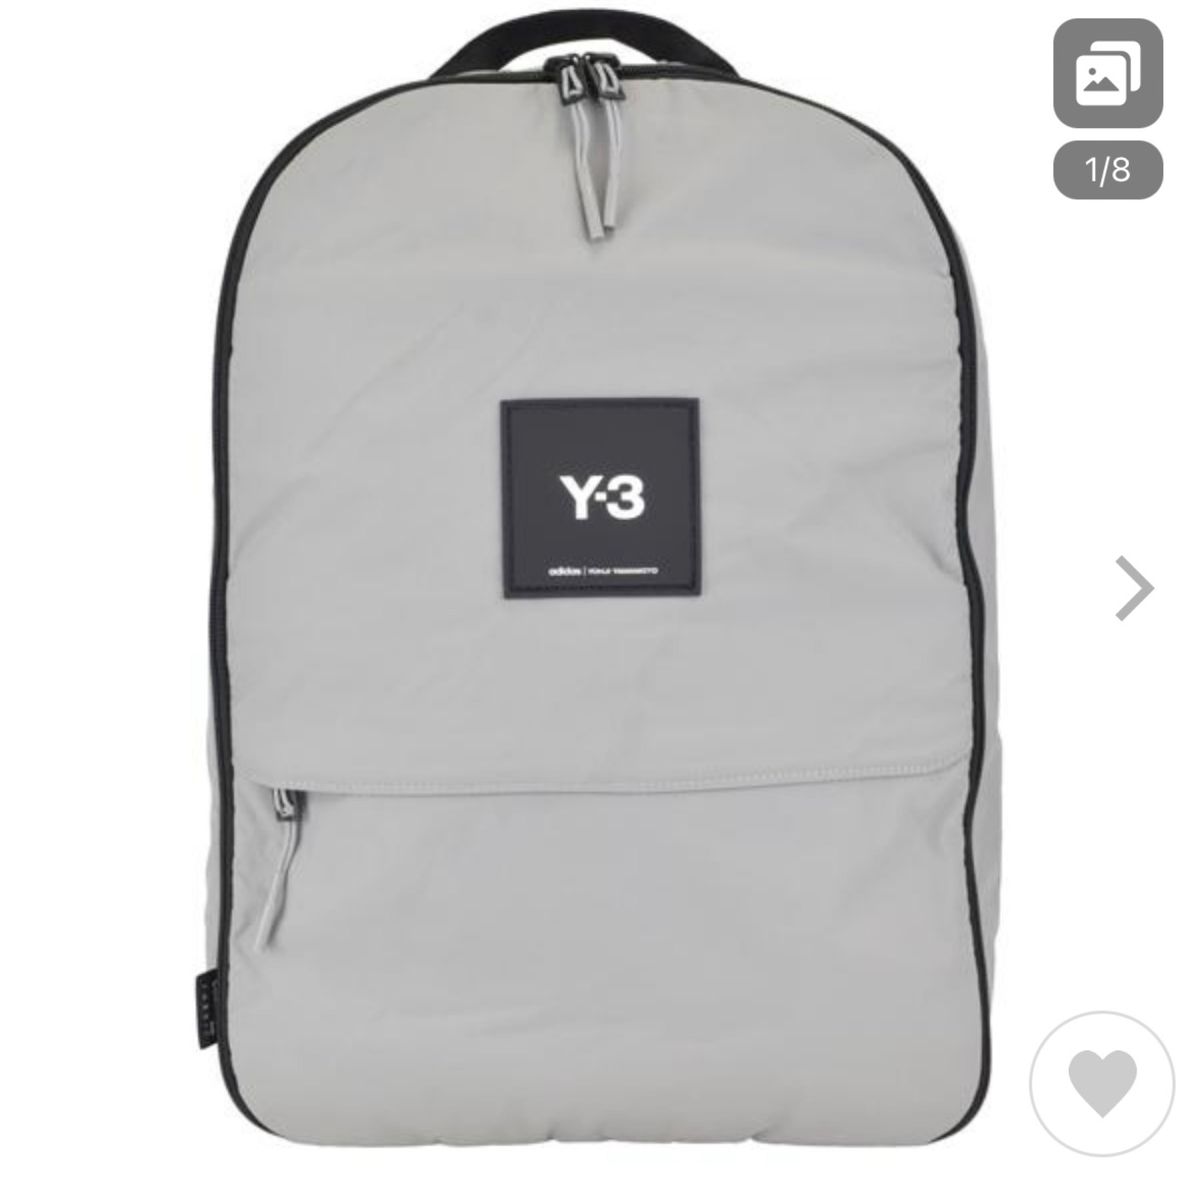 Y-3 ワイスリー TECH BACKPACK/バックパック　リュックサック/グレー/HD3335